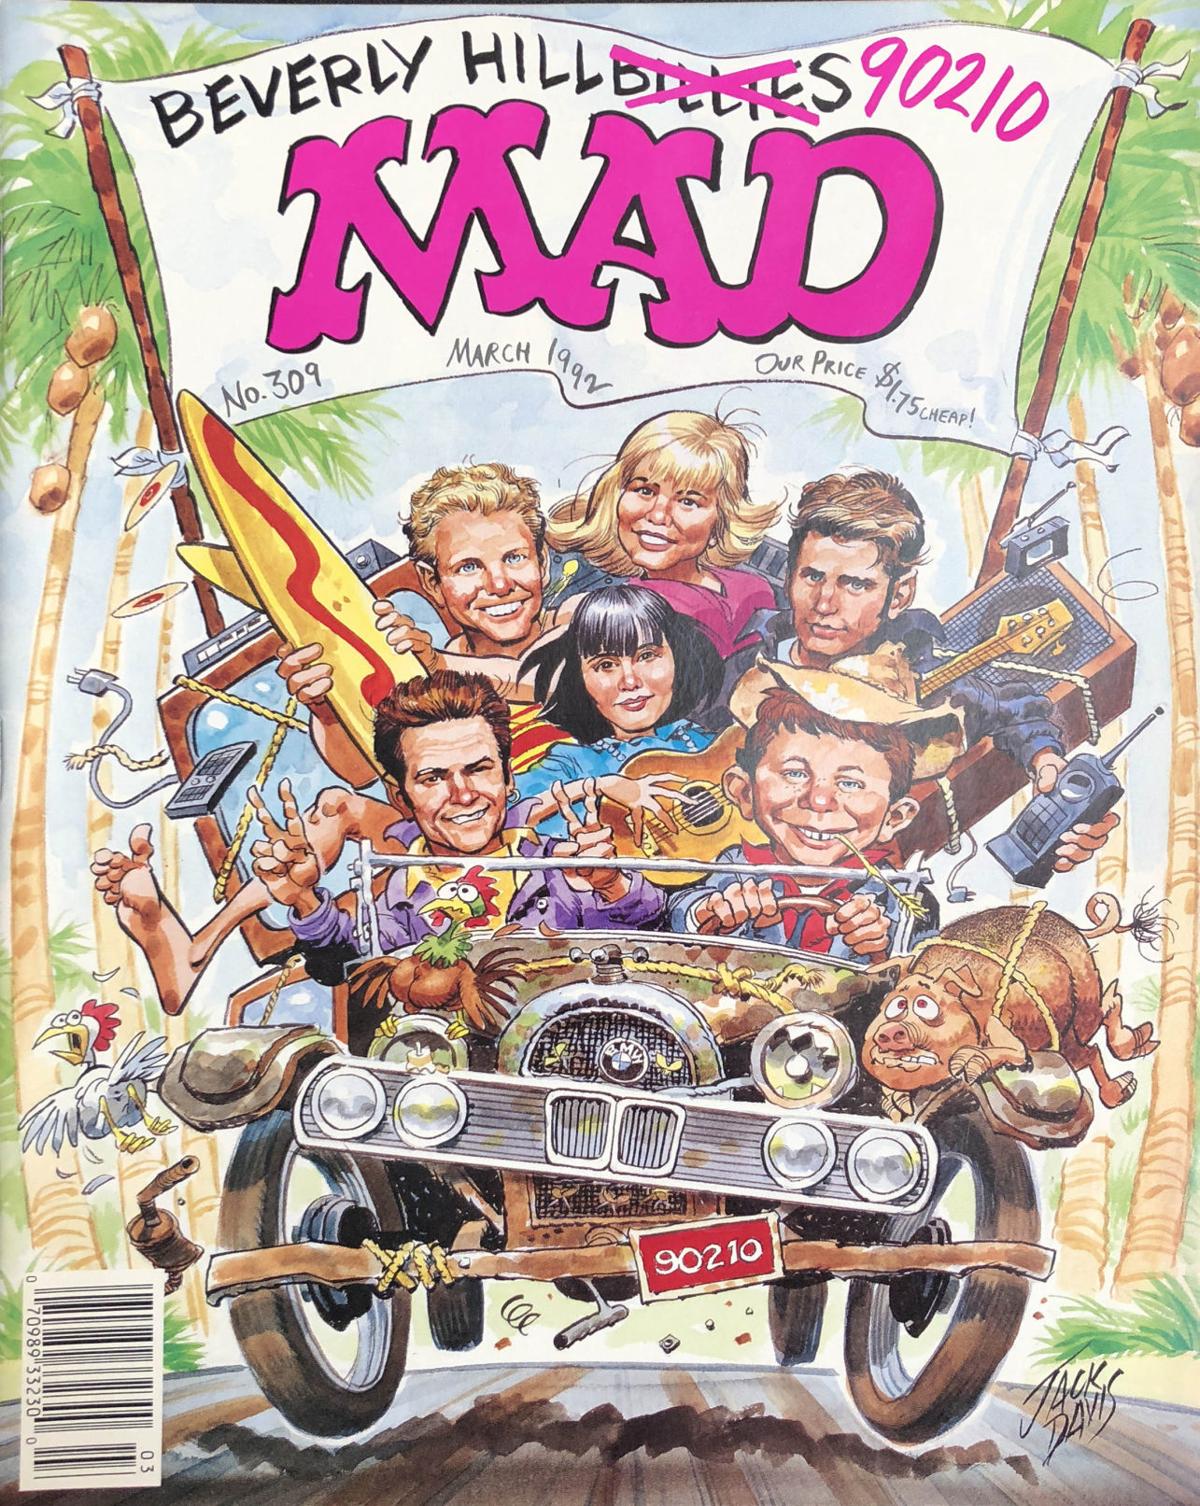 Mad Magazine Cover Gallery See Mad Magazine Covers Through The Years Lifestyles